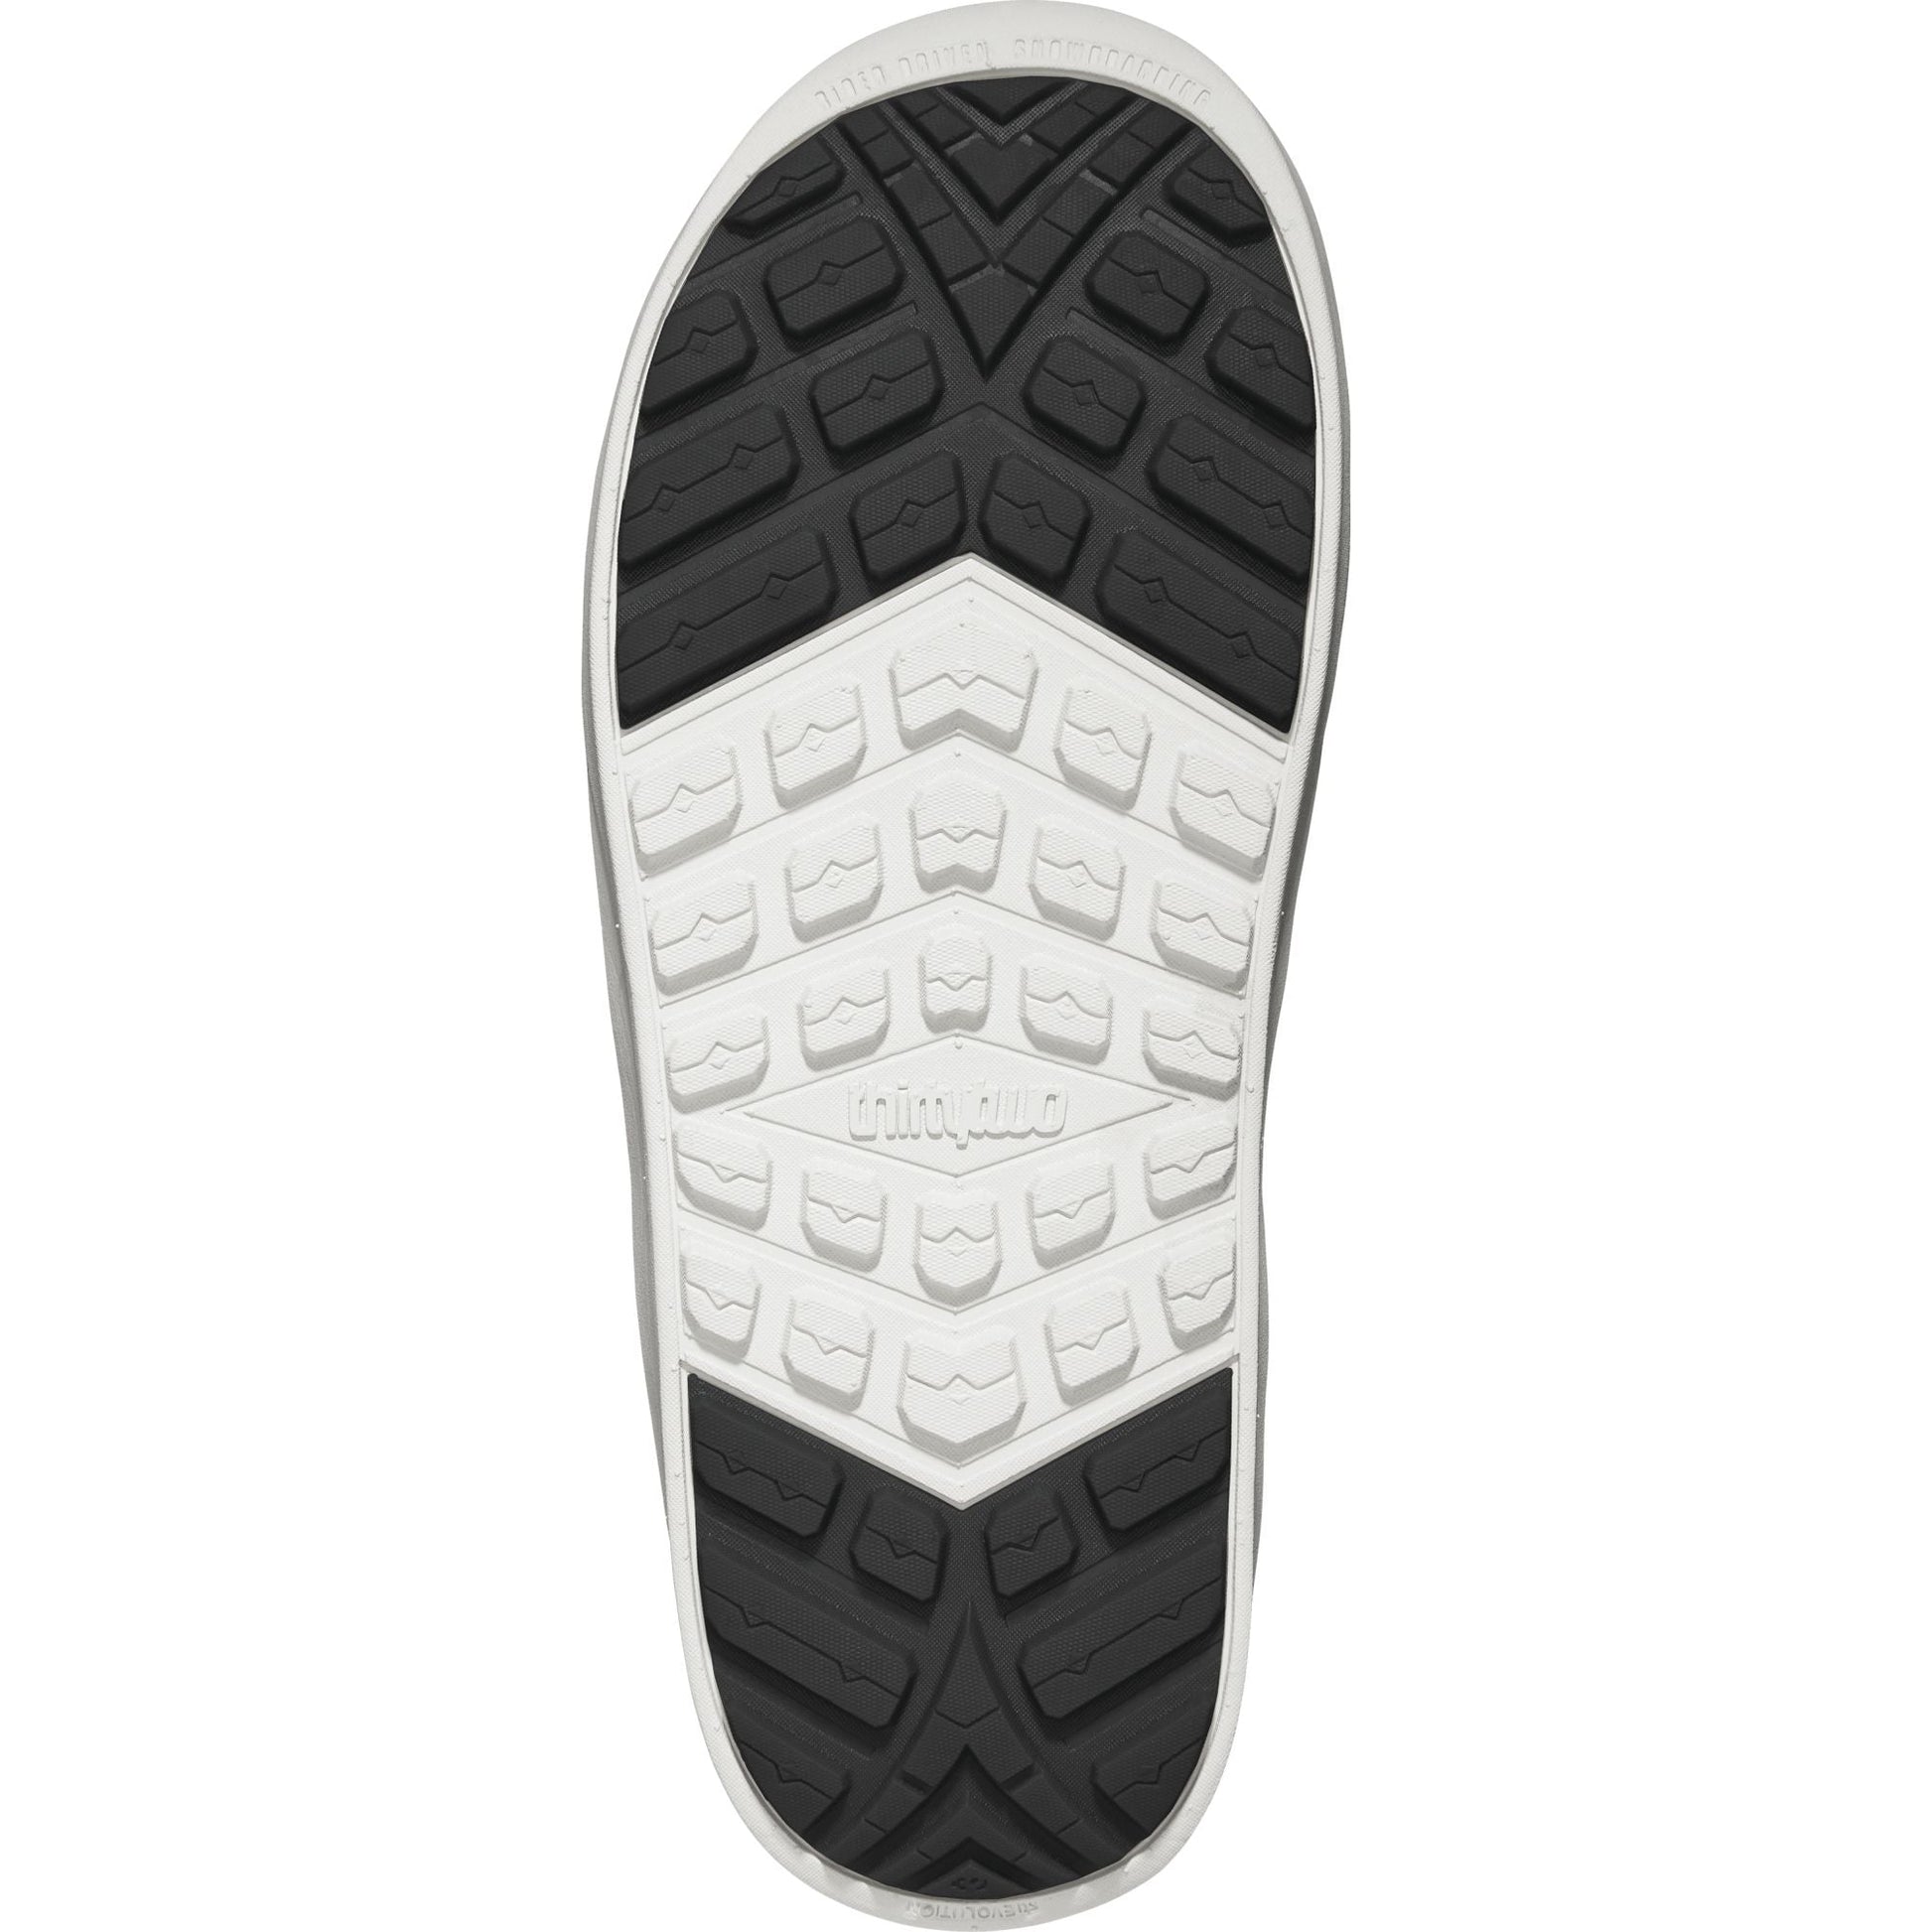 ThirtyTwo Lashed Powell Double BOA Snowboard Boots - Openbox White Black - ThirtyTwo Snowboard Boots